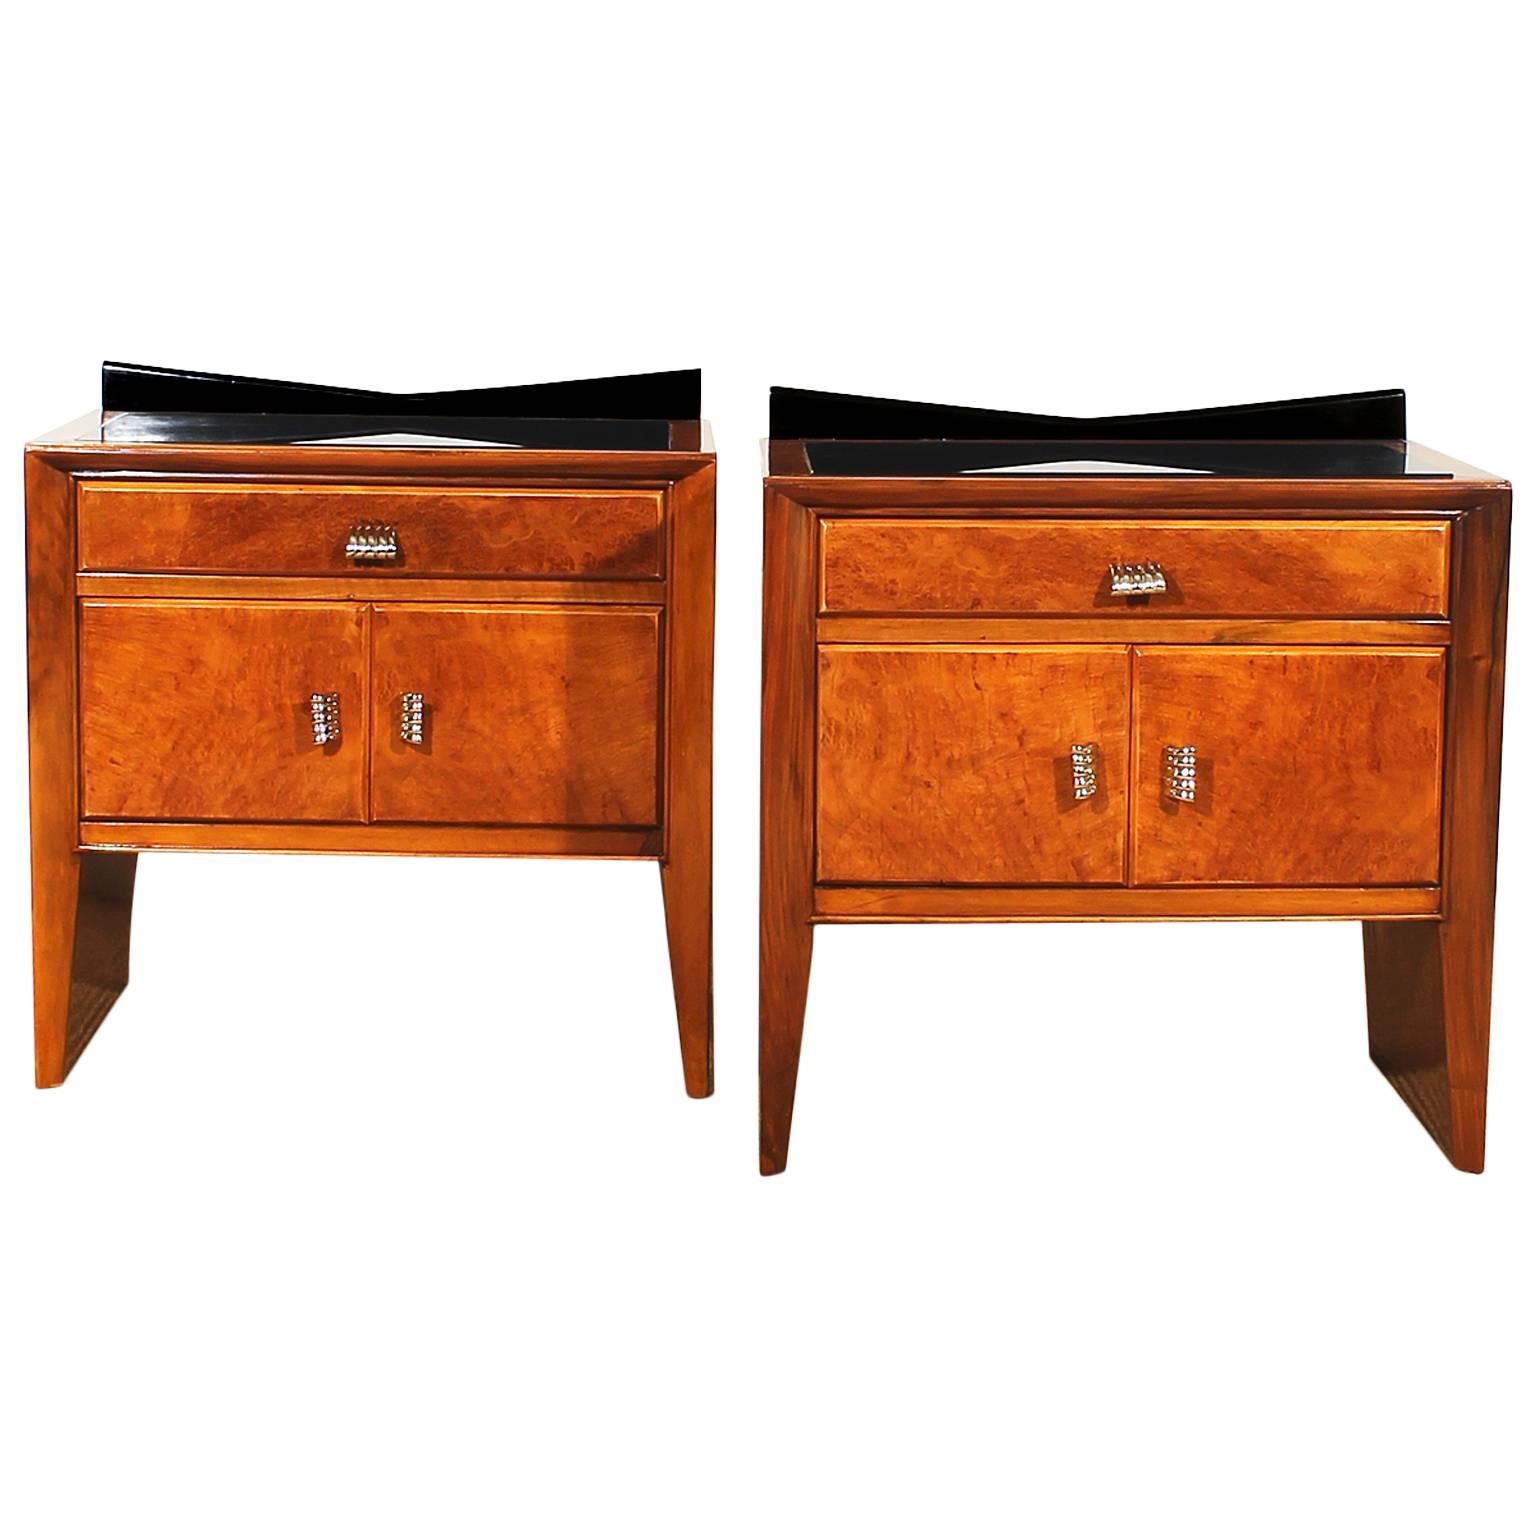 Pair of Art Deco Cubist Night stands